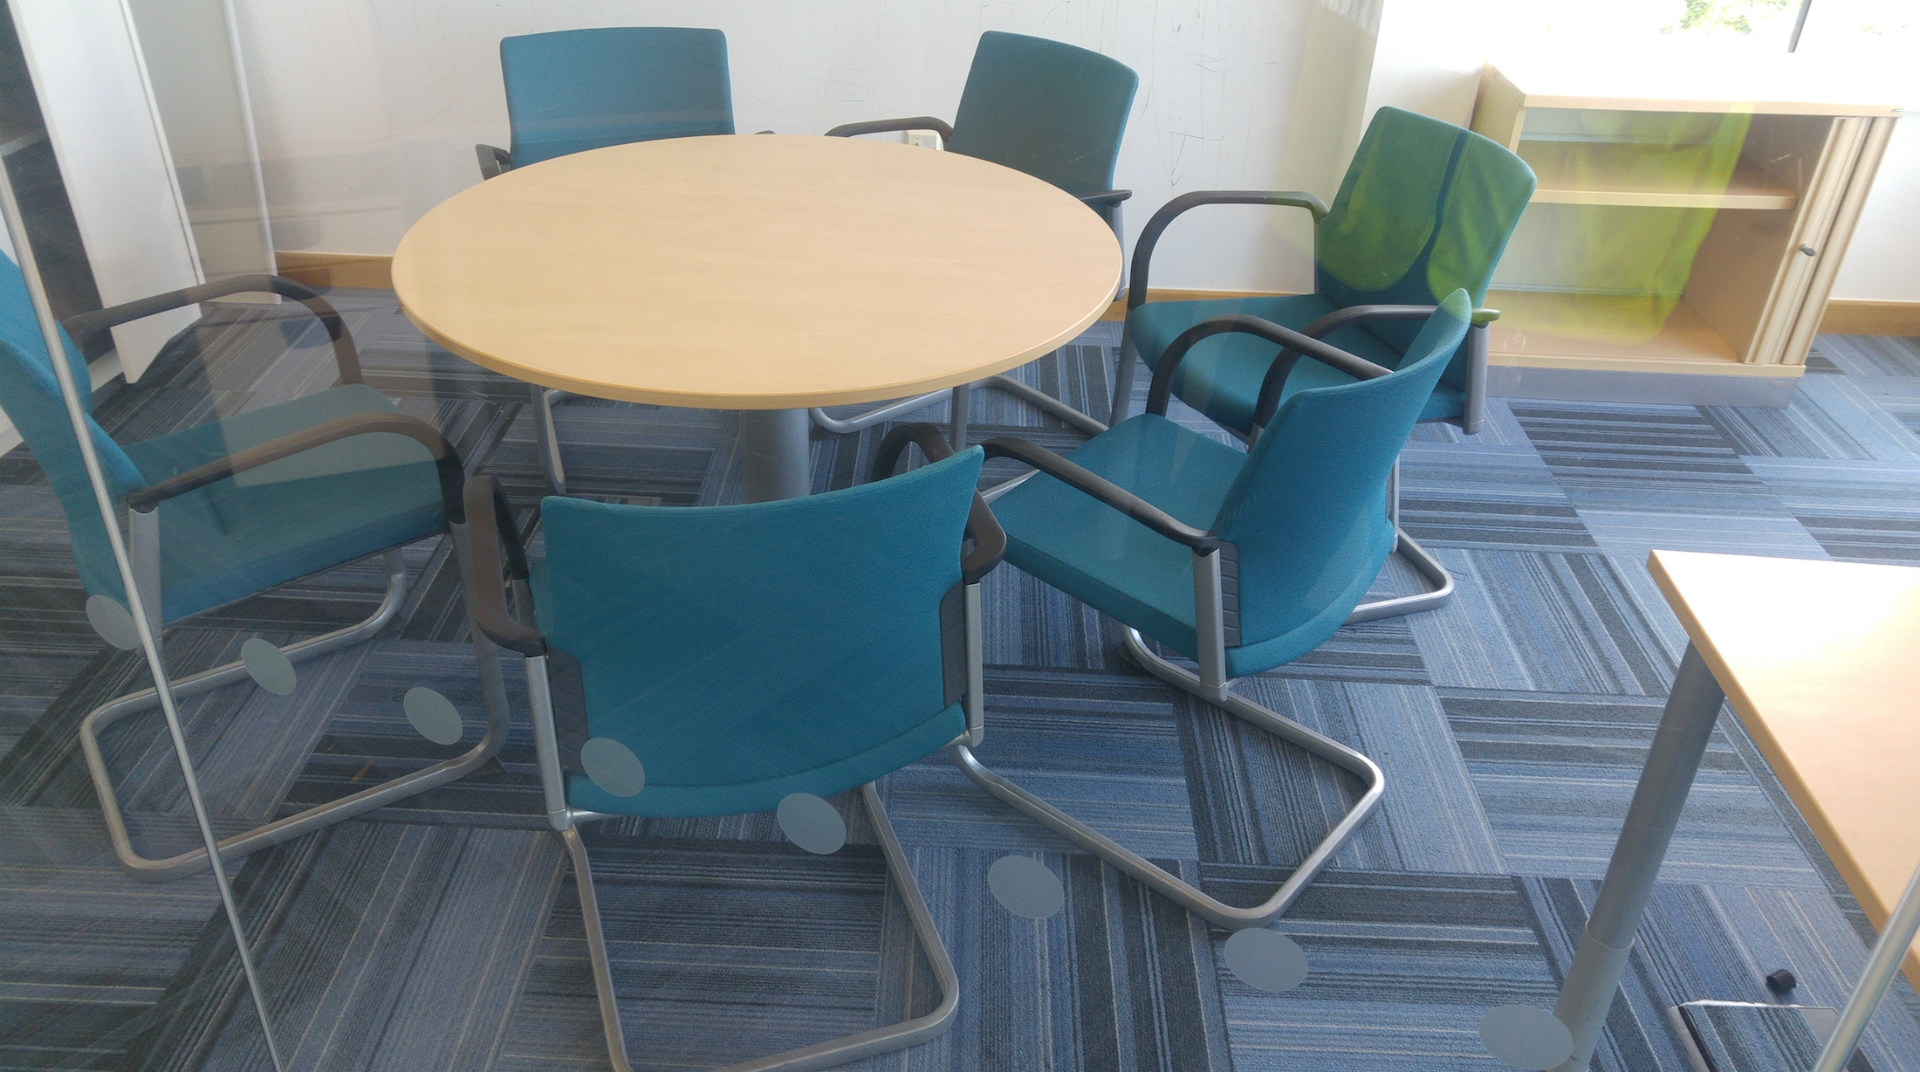 1 x Round Conference Table with 6 x Blue Chairs